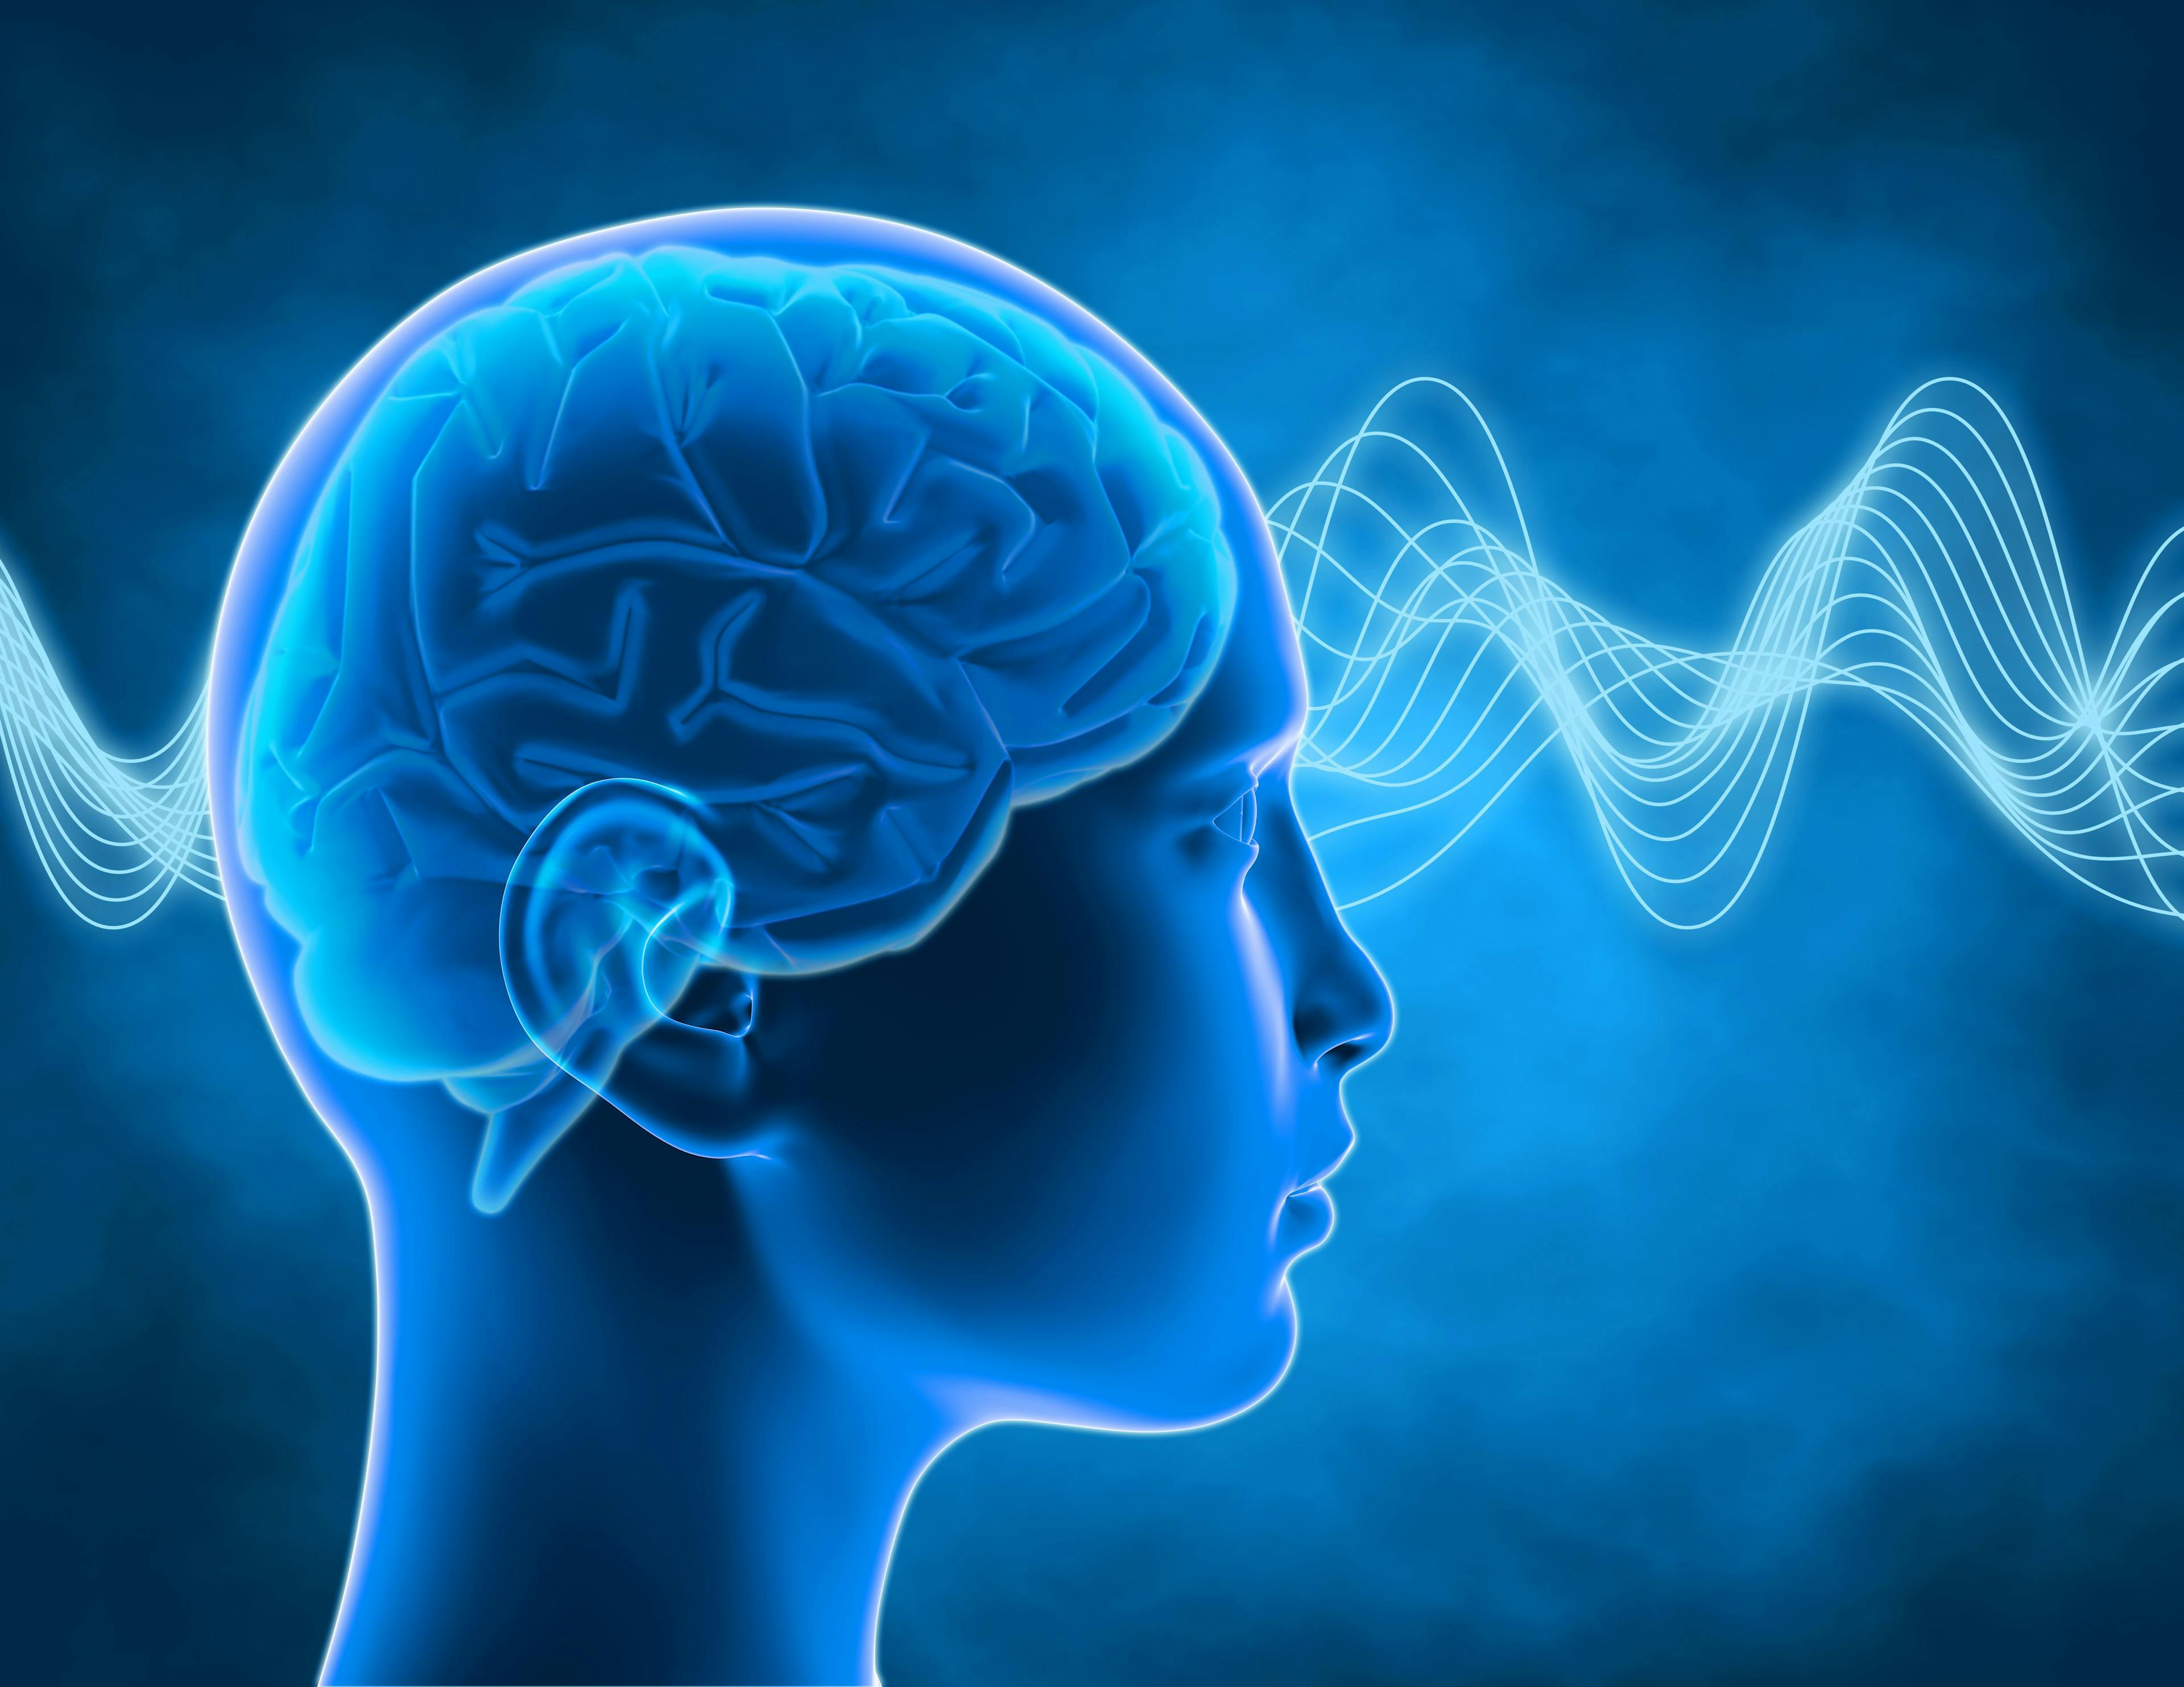 People With Epilepsy May Have Mechanisms Within Their Brain to Reduce Epileptic Activity